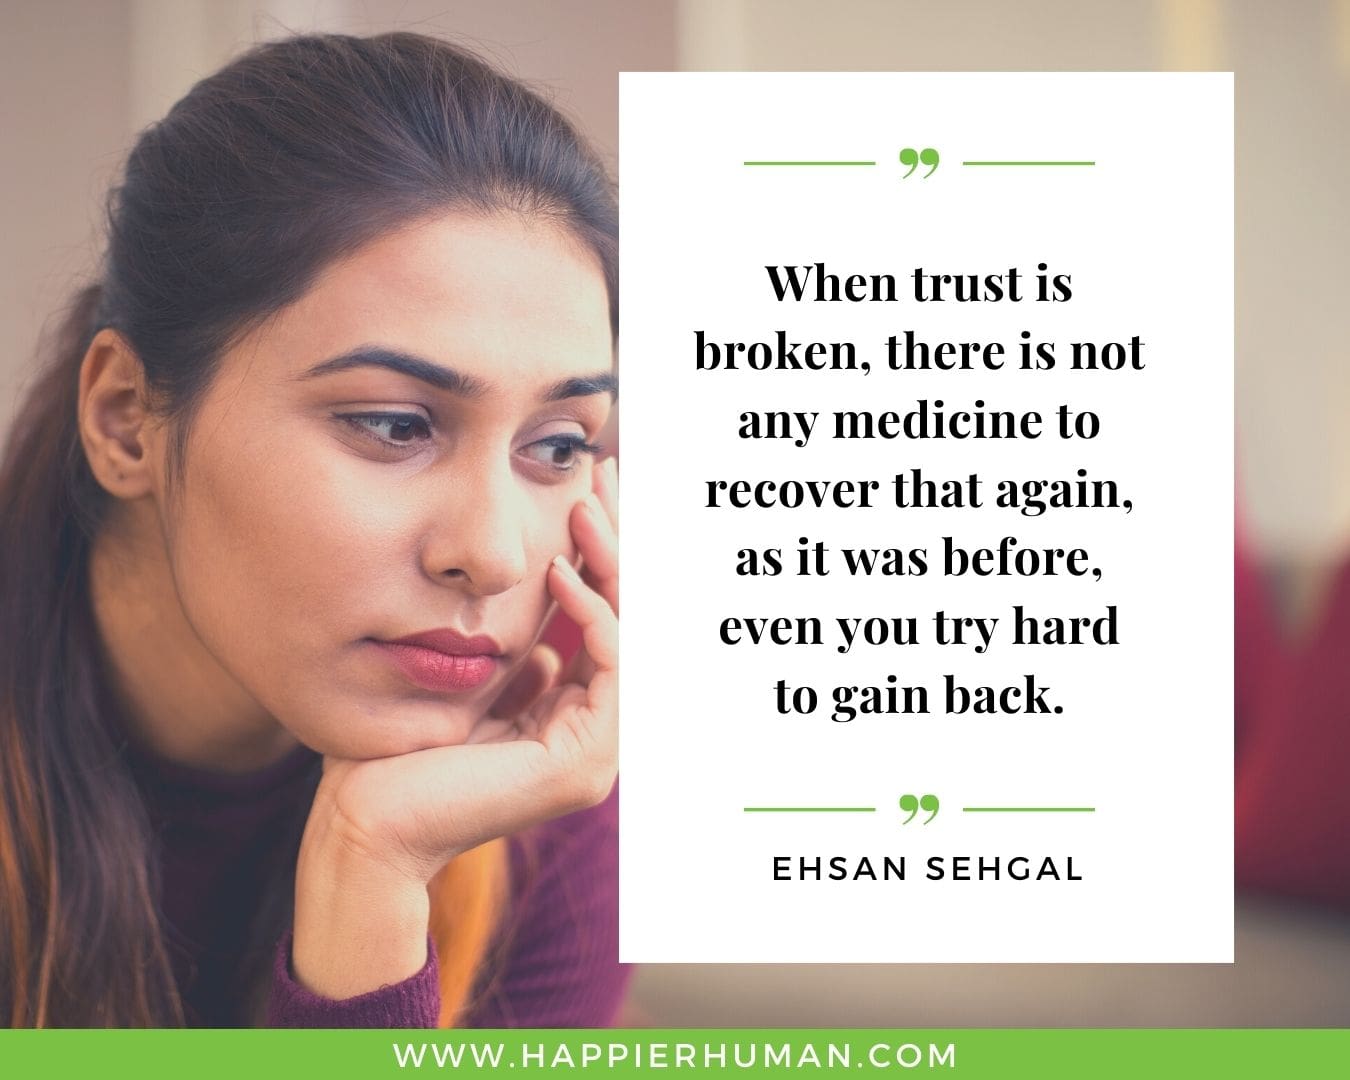 Broken Trust Quotes - “When trust is broken, there is not any medicine to recover that again, as it was before, even you try hard to gain back” - Ehsan Sehgal